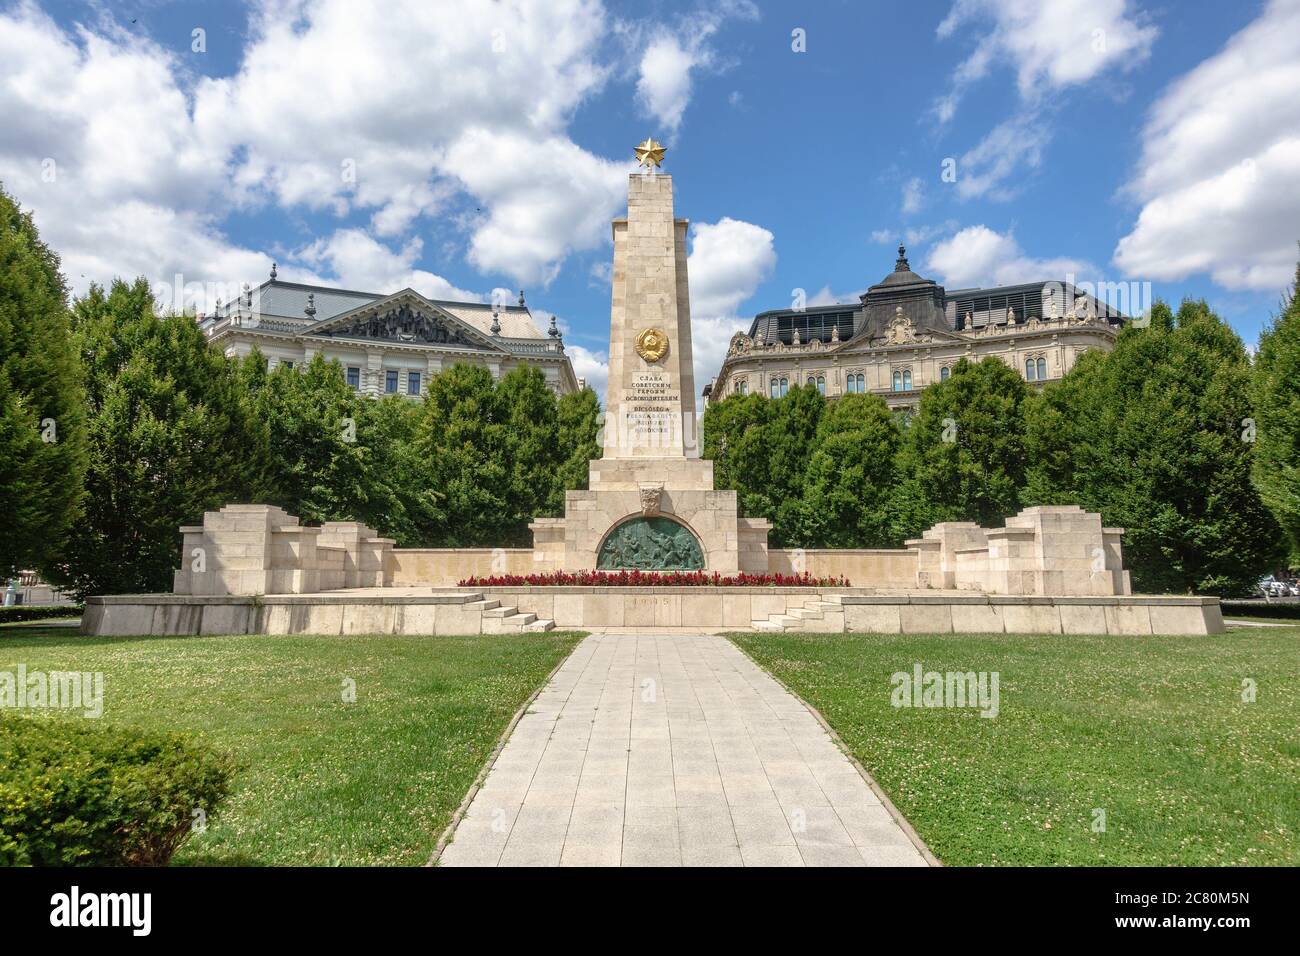 The controversial Soviet Red Army Liberation Memorial on Szabadsag ter in Budapest, Hungary Stock Photo